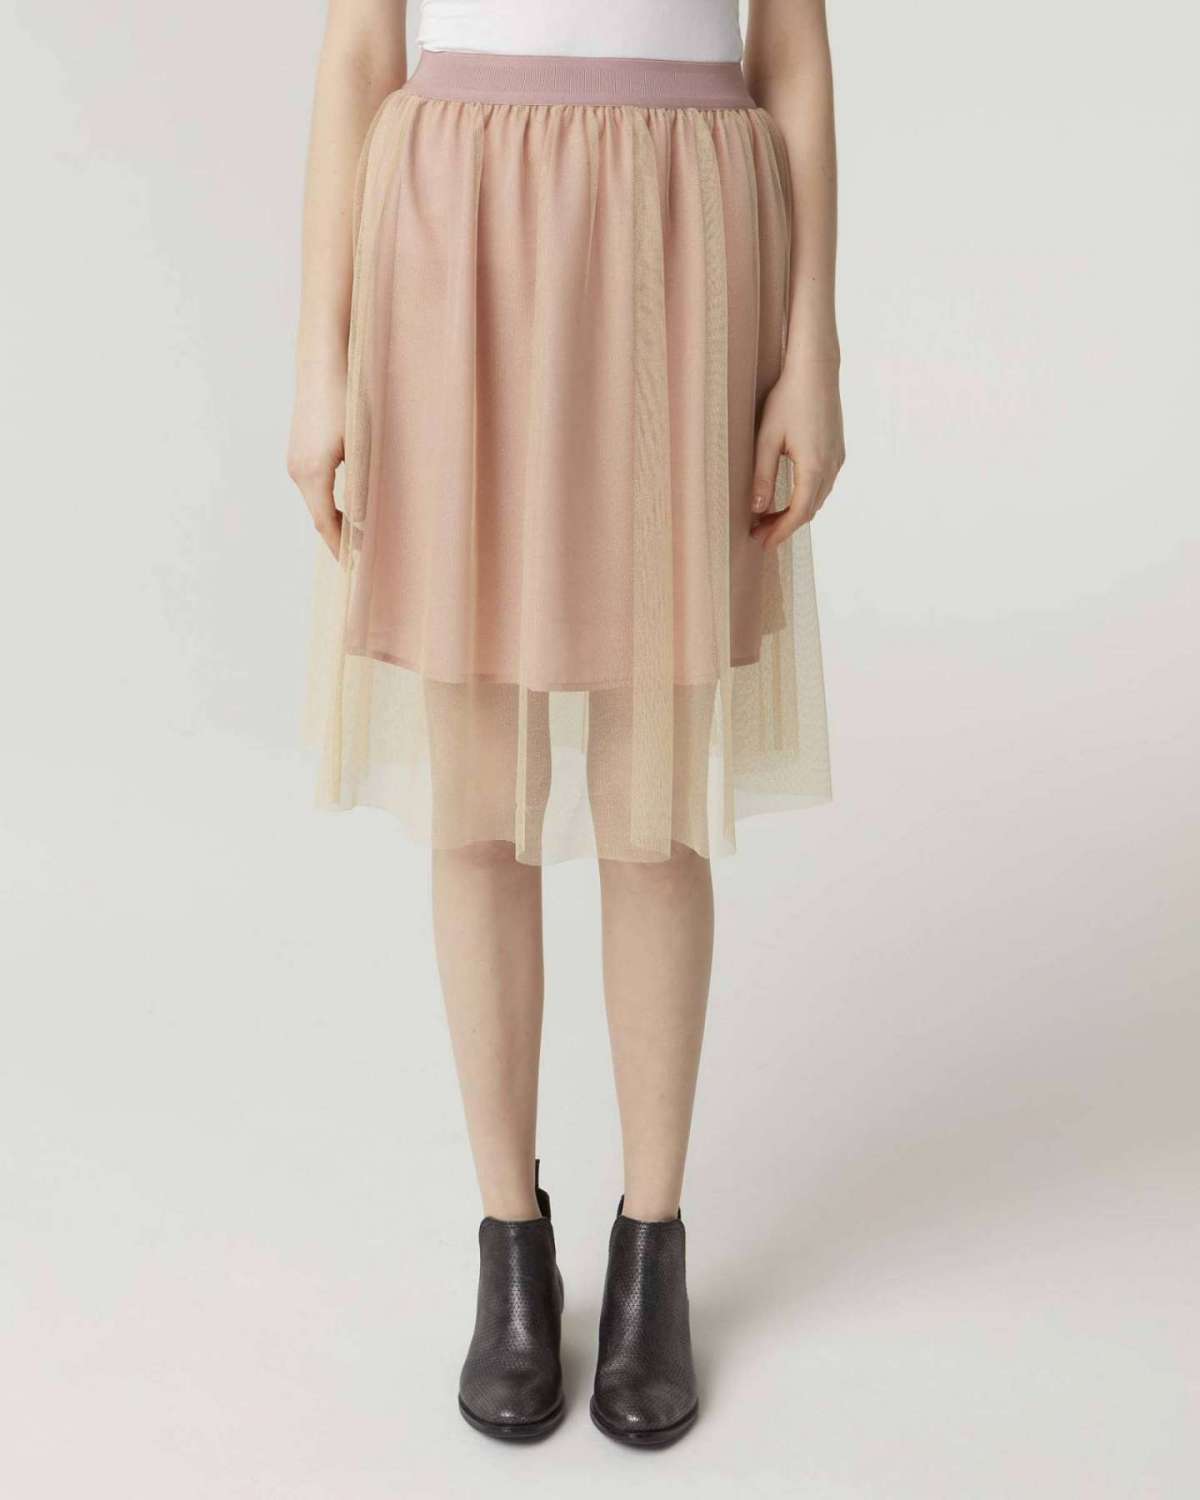 Gonna in tulle Sisley a 49 euro